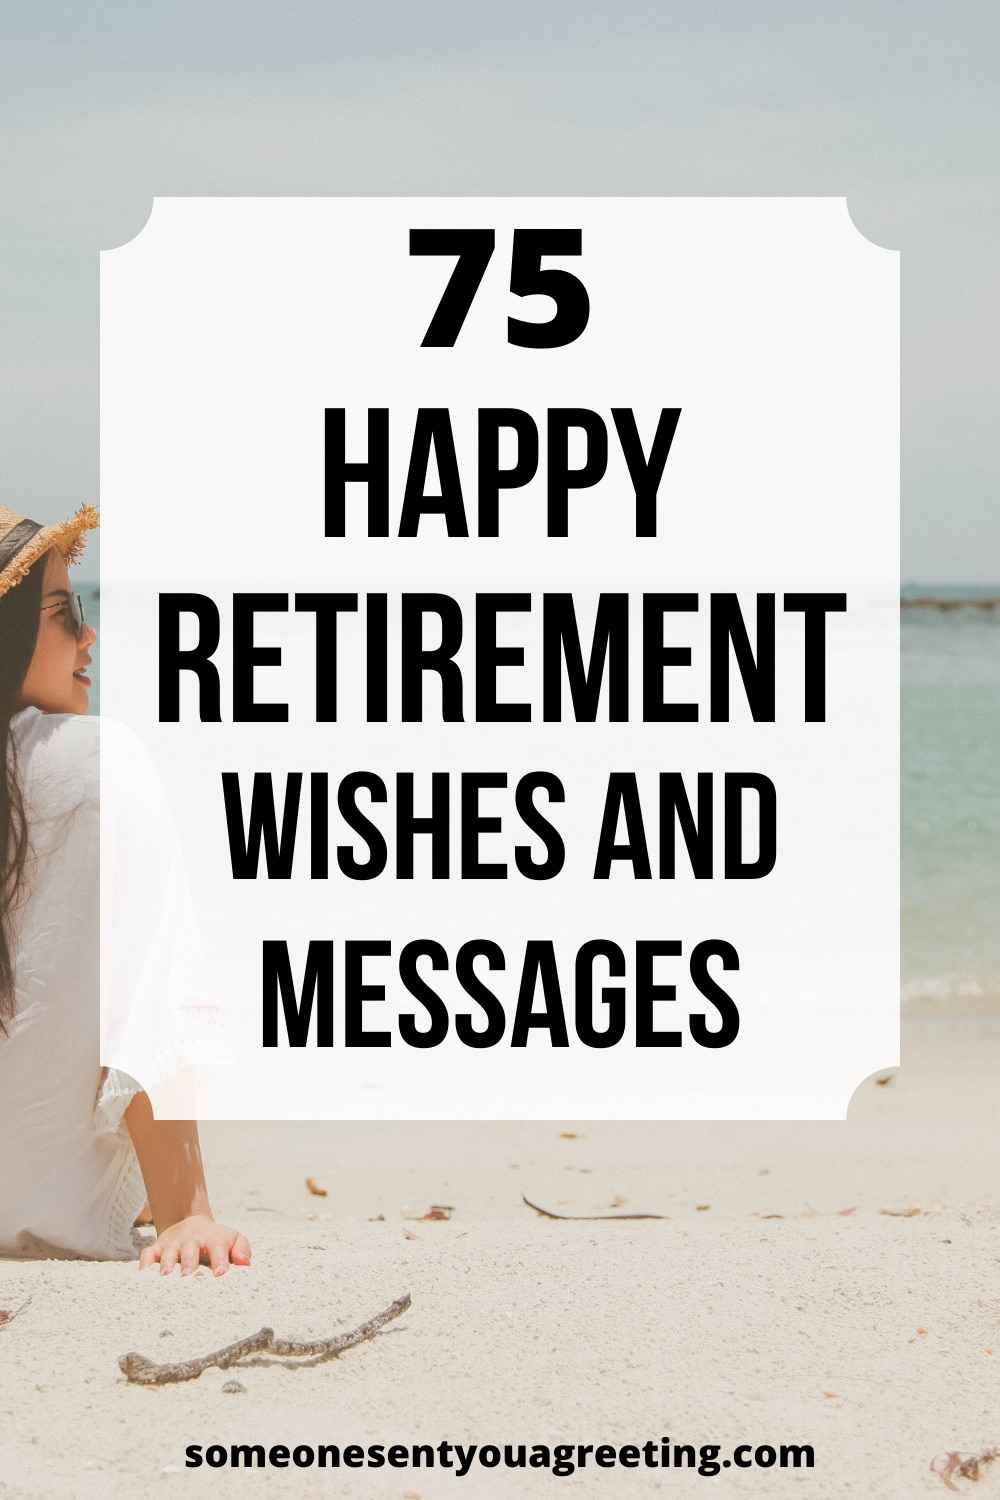 75 Happy Retirement Wishes and Messages - Someone Sent You A Greeting